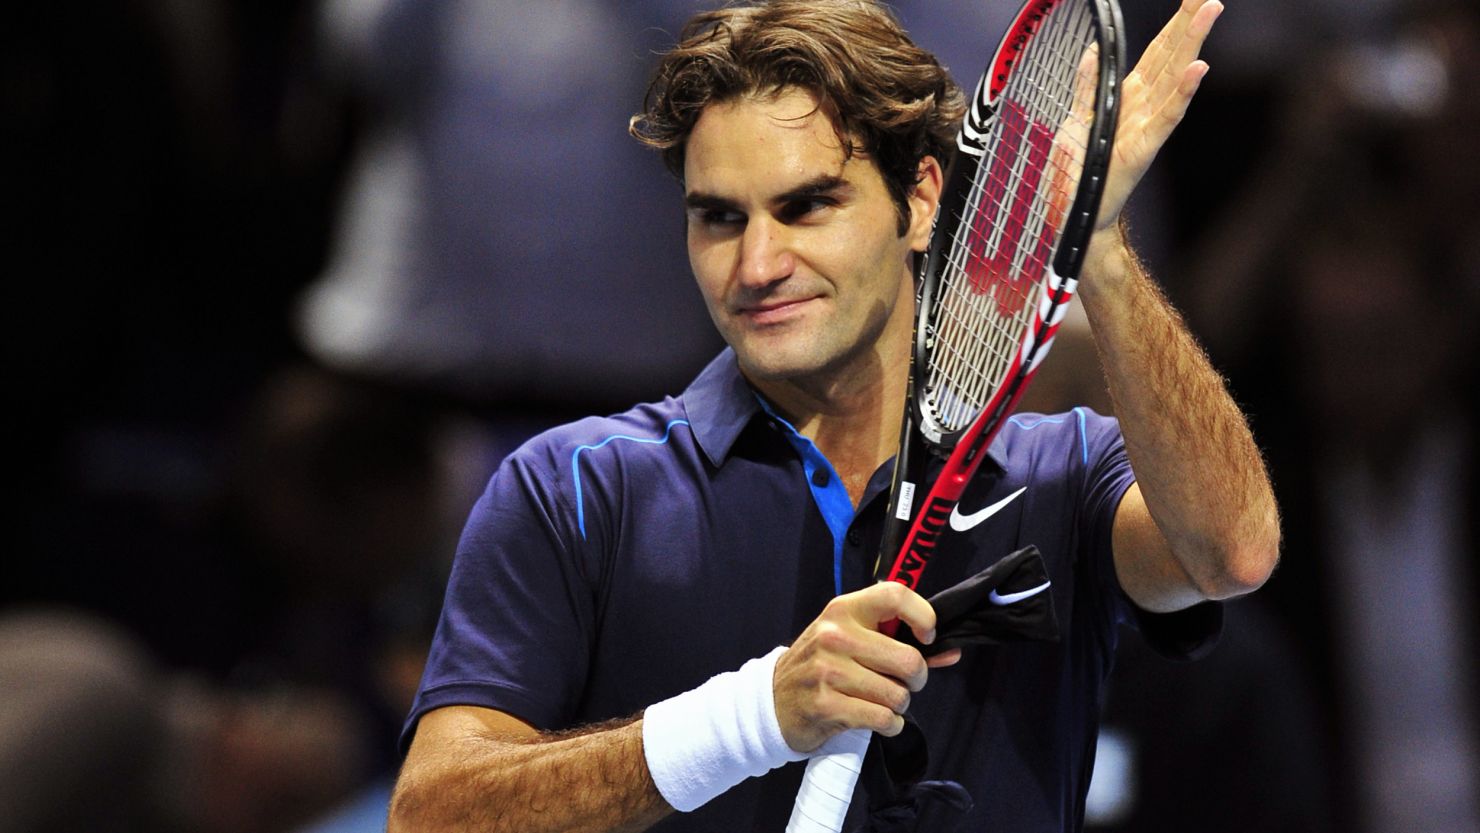 Roger Federer is seeking a record sixth title at the men's end-of-season championships in London.